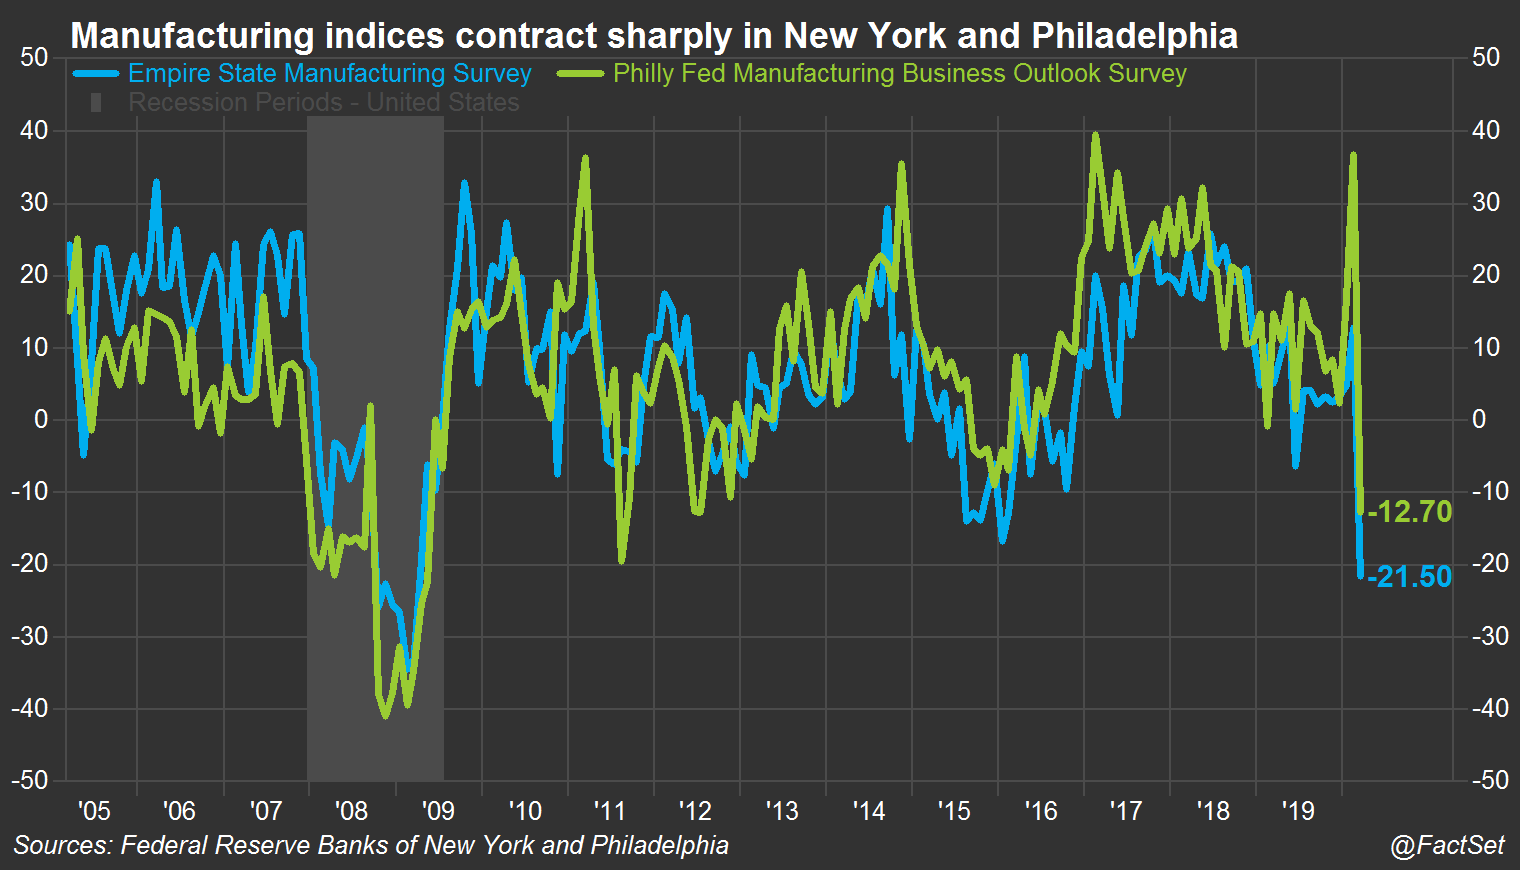 NY and Philly Fed mfg indices